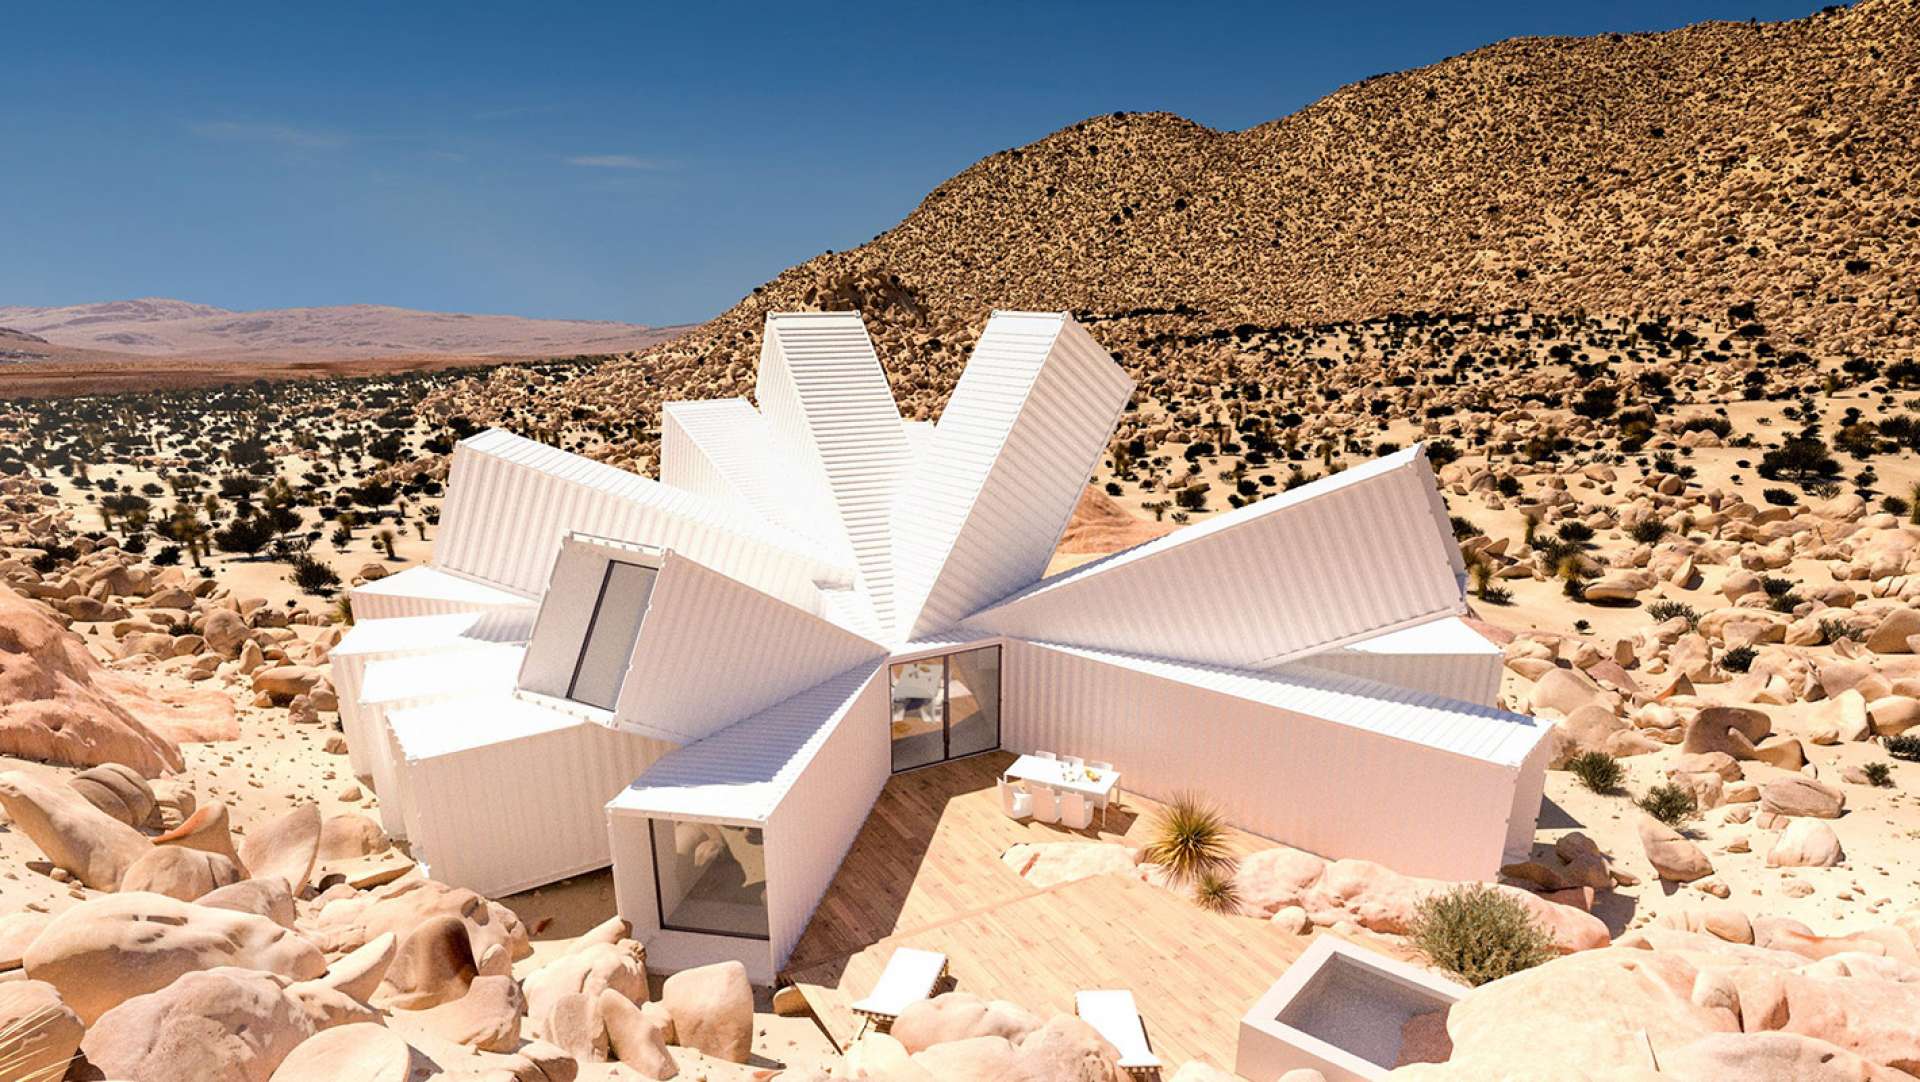 Splayed shipping containers form Joshua Tree Residence conceived by James Whitaker